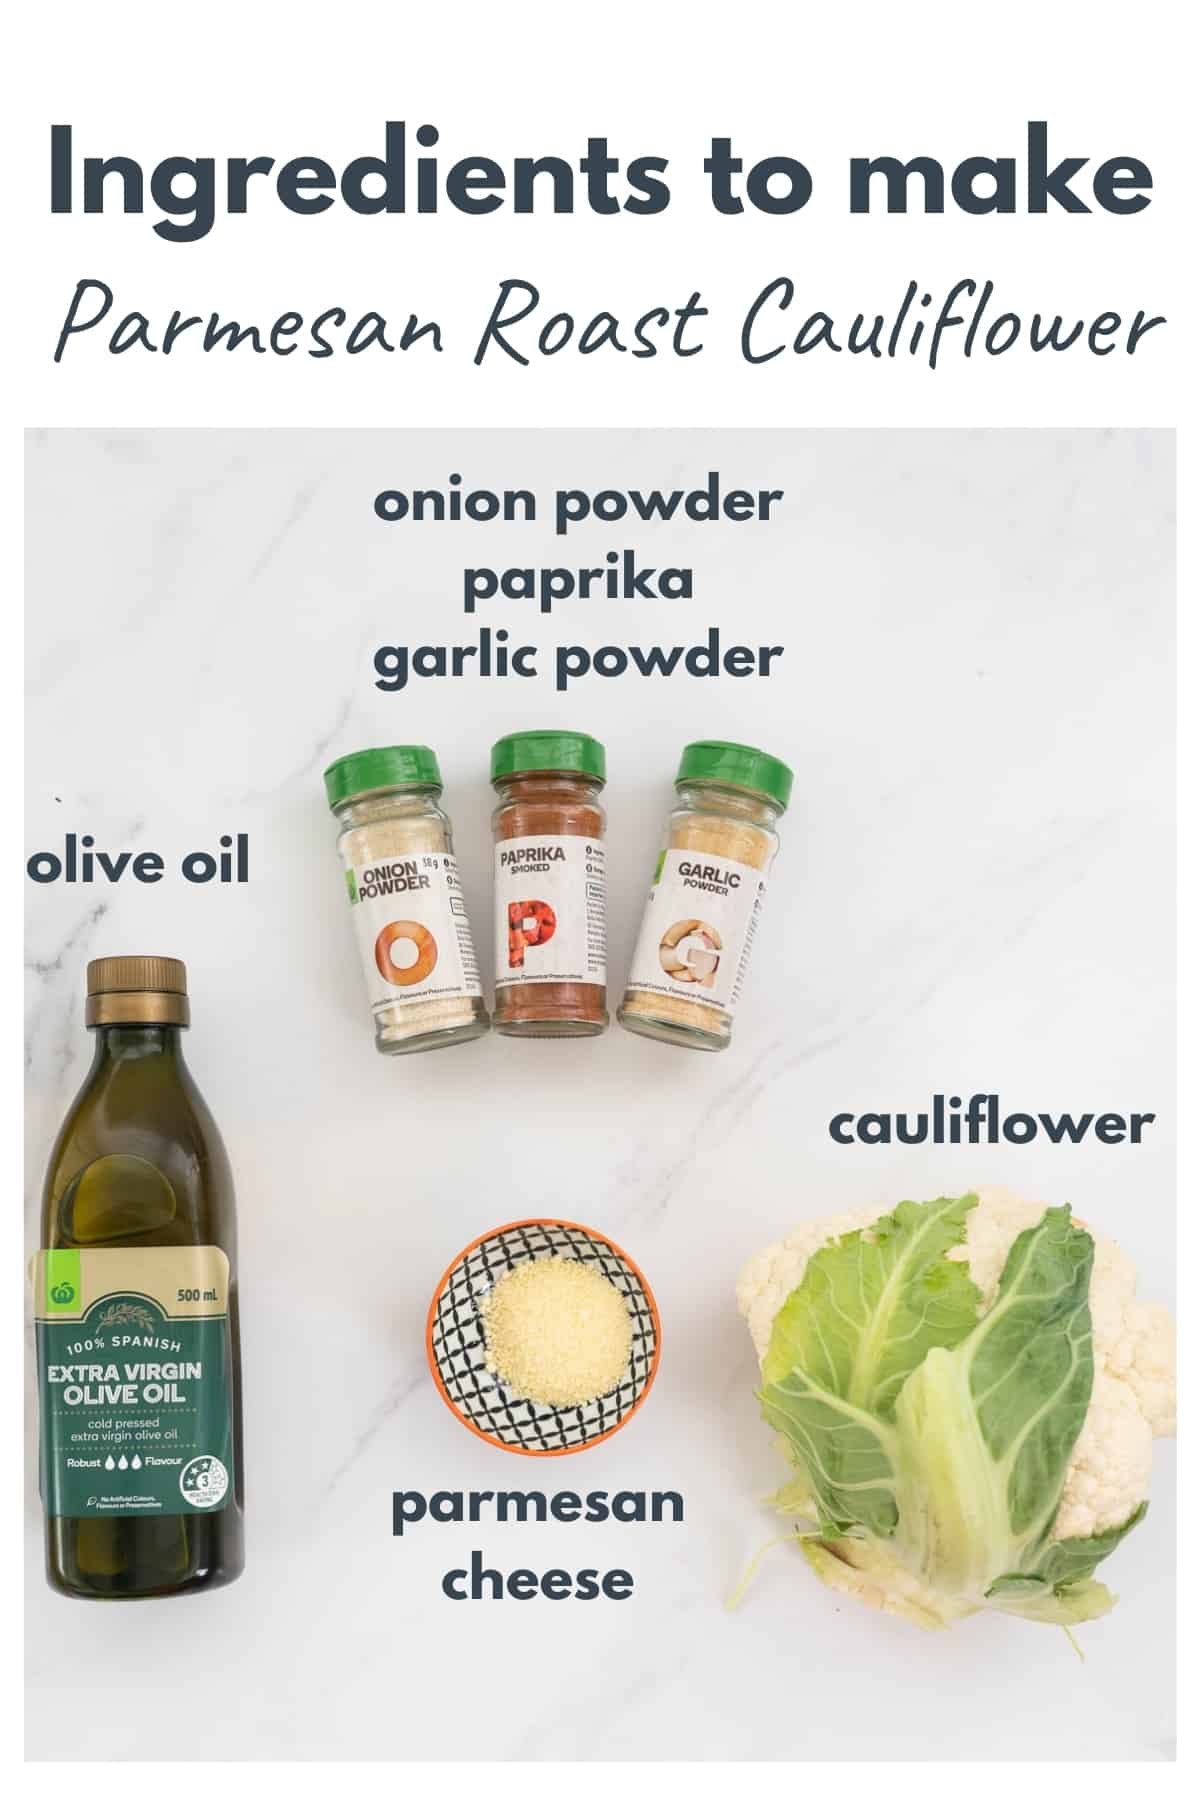 Ingredients to make parmesan roast cauliflower laid out on a bench with text overlay.